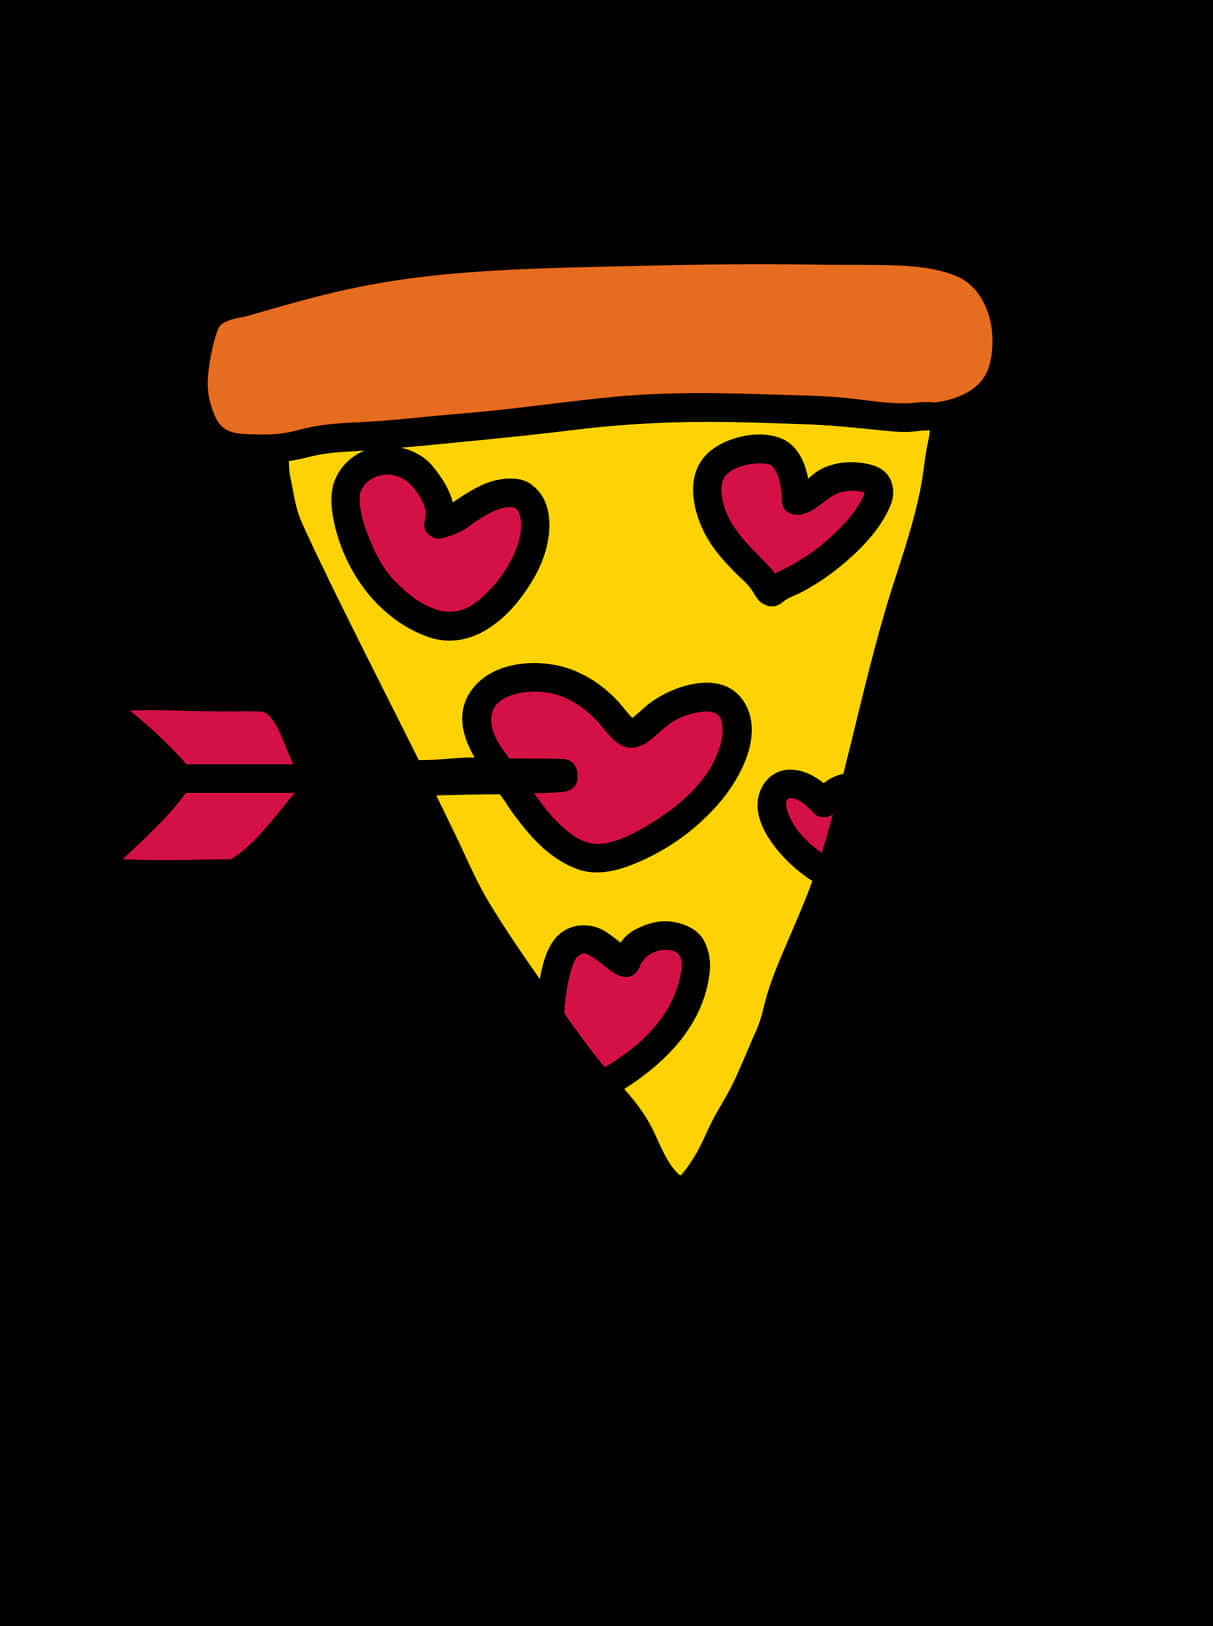 Love Pizza Slice Graphic PNG image